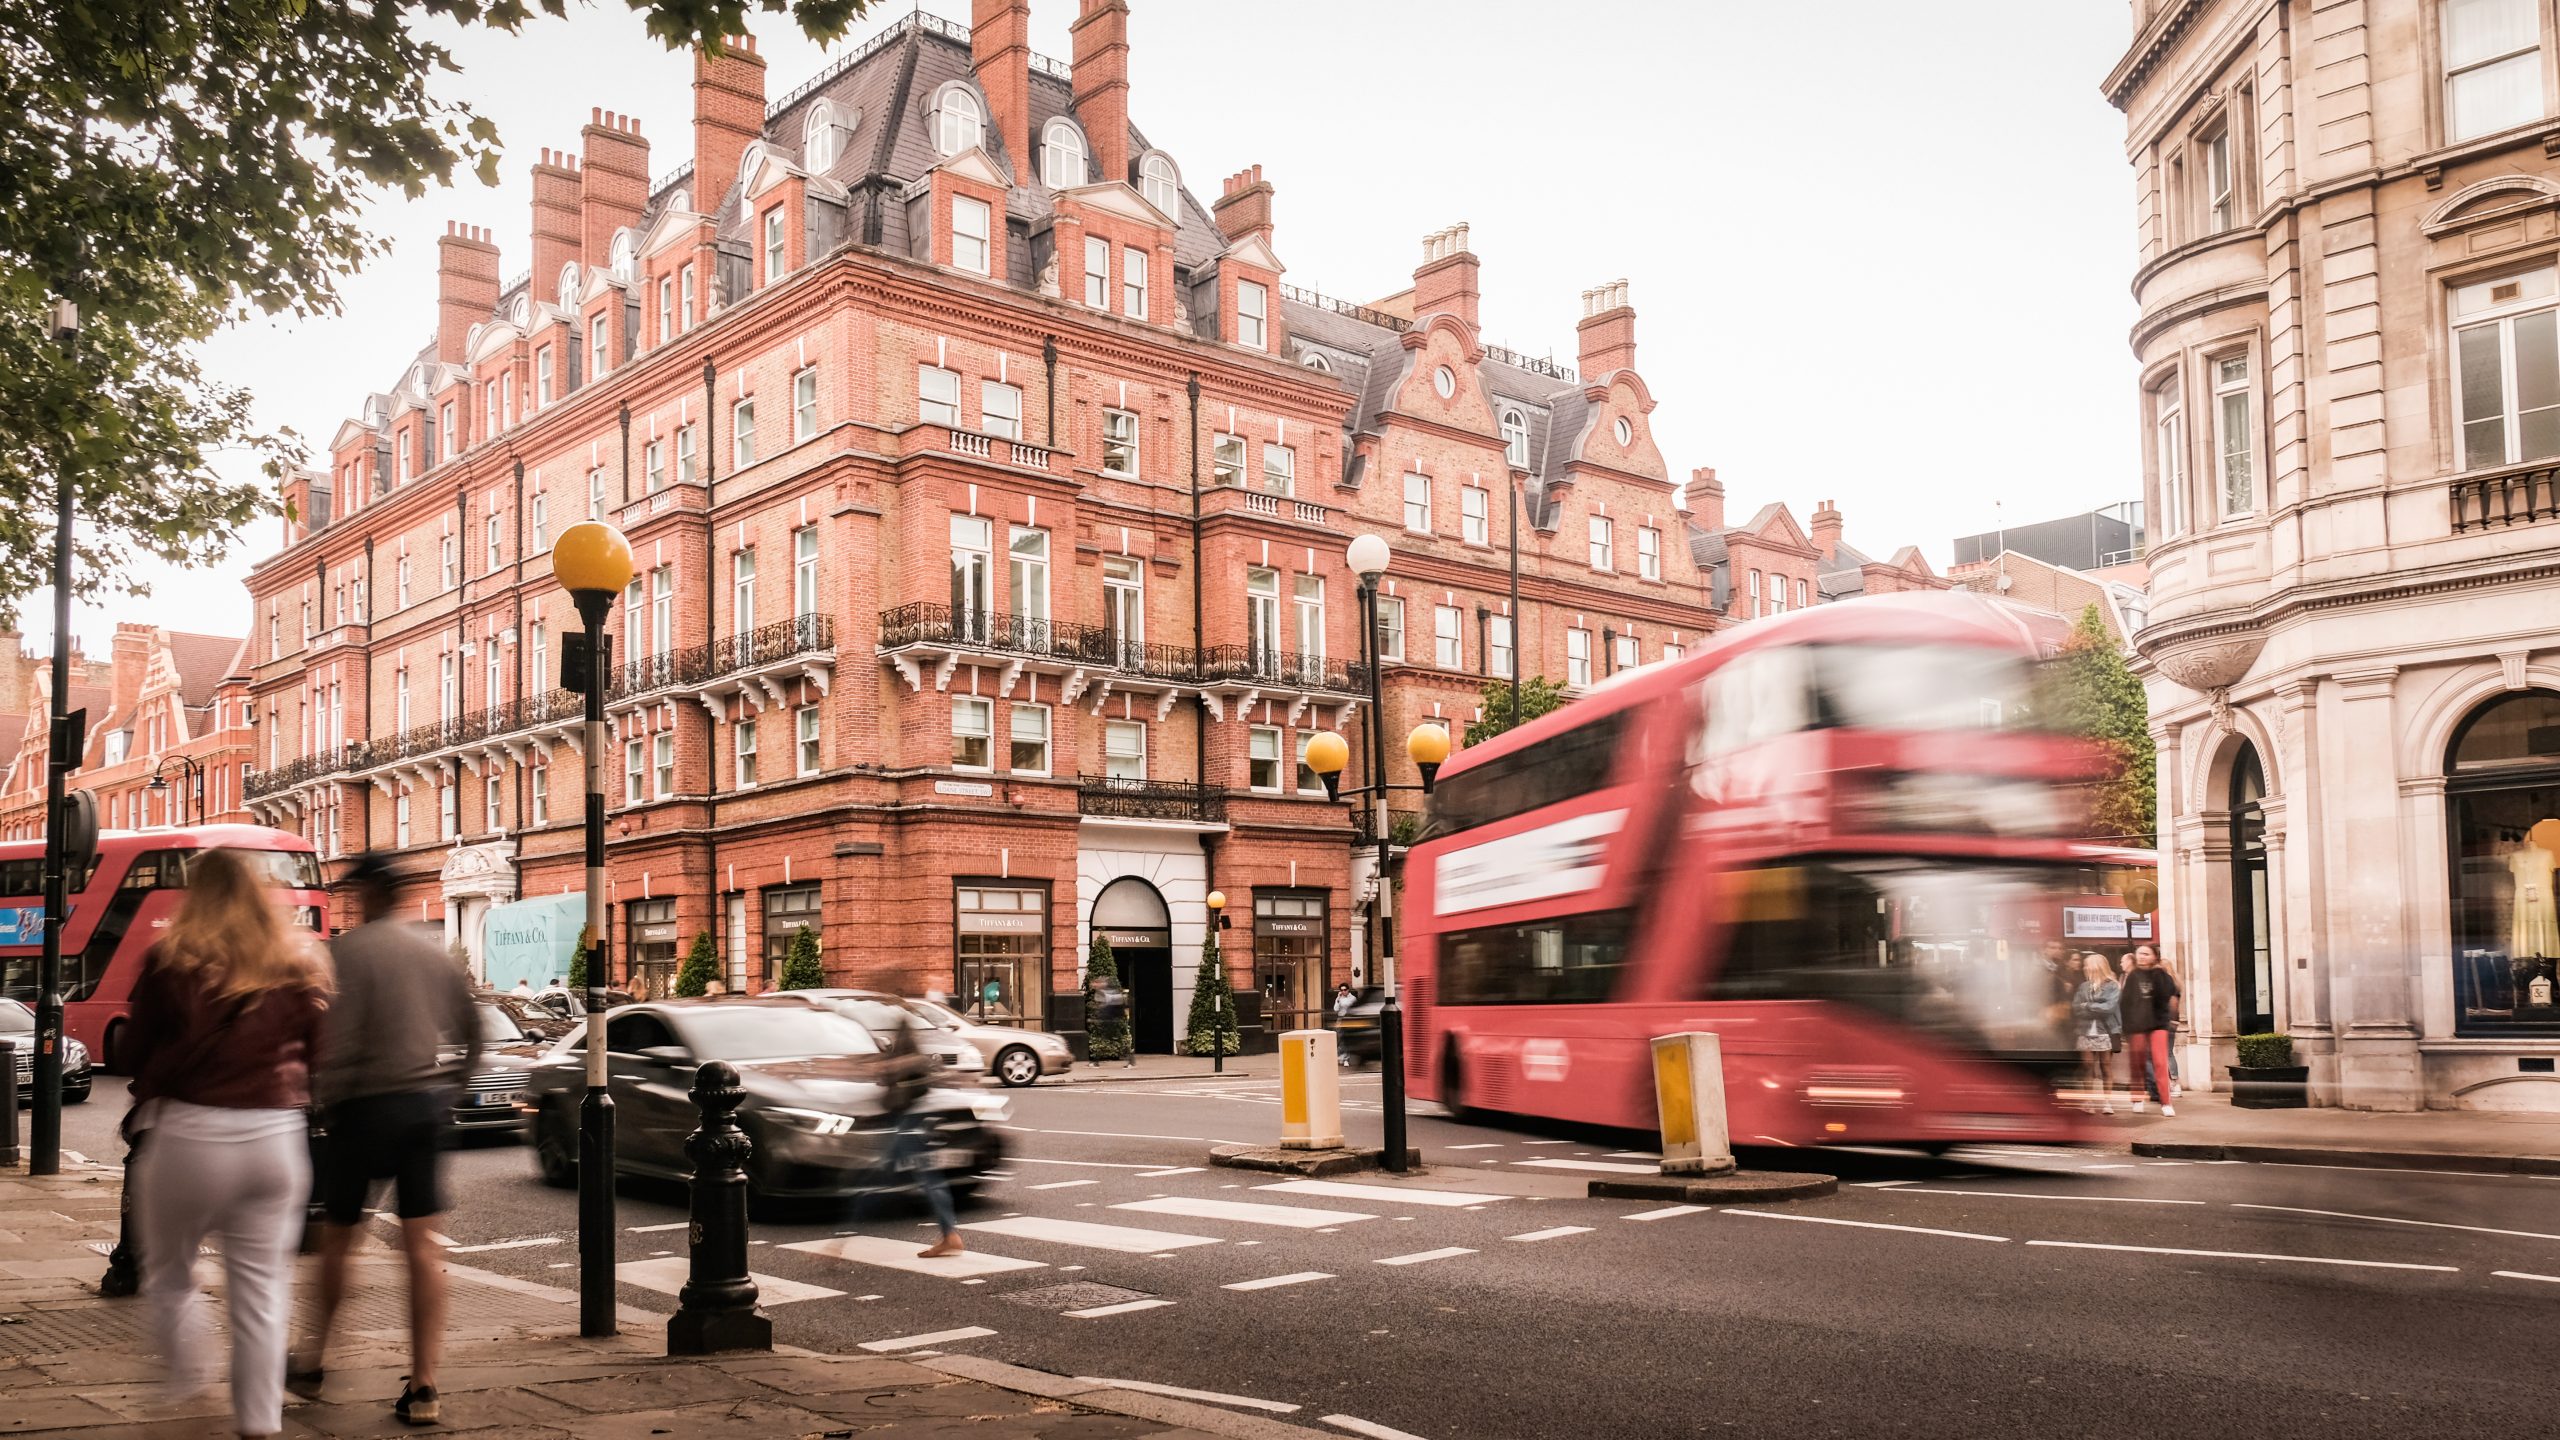 Motion blurred view of Sloane Square, an upmarket area of Chelsea / Knightsbridge.